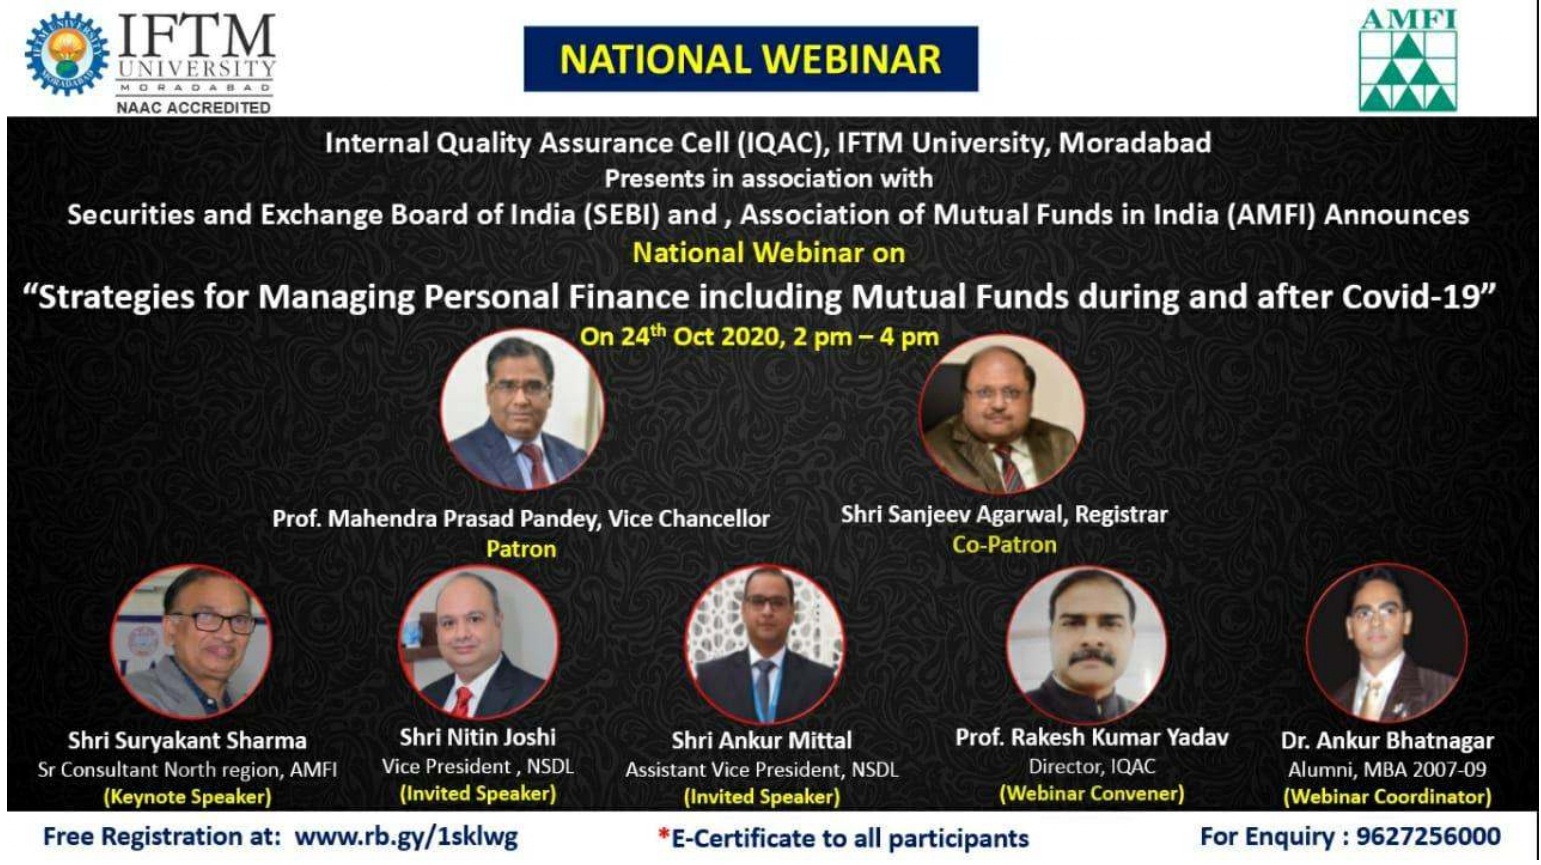 National Webinar on Strategies for Managing Personal Finance including Mutual Fund during and after COVID-19.